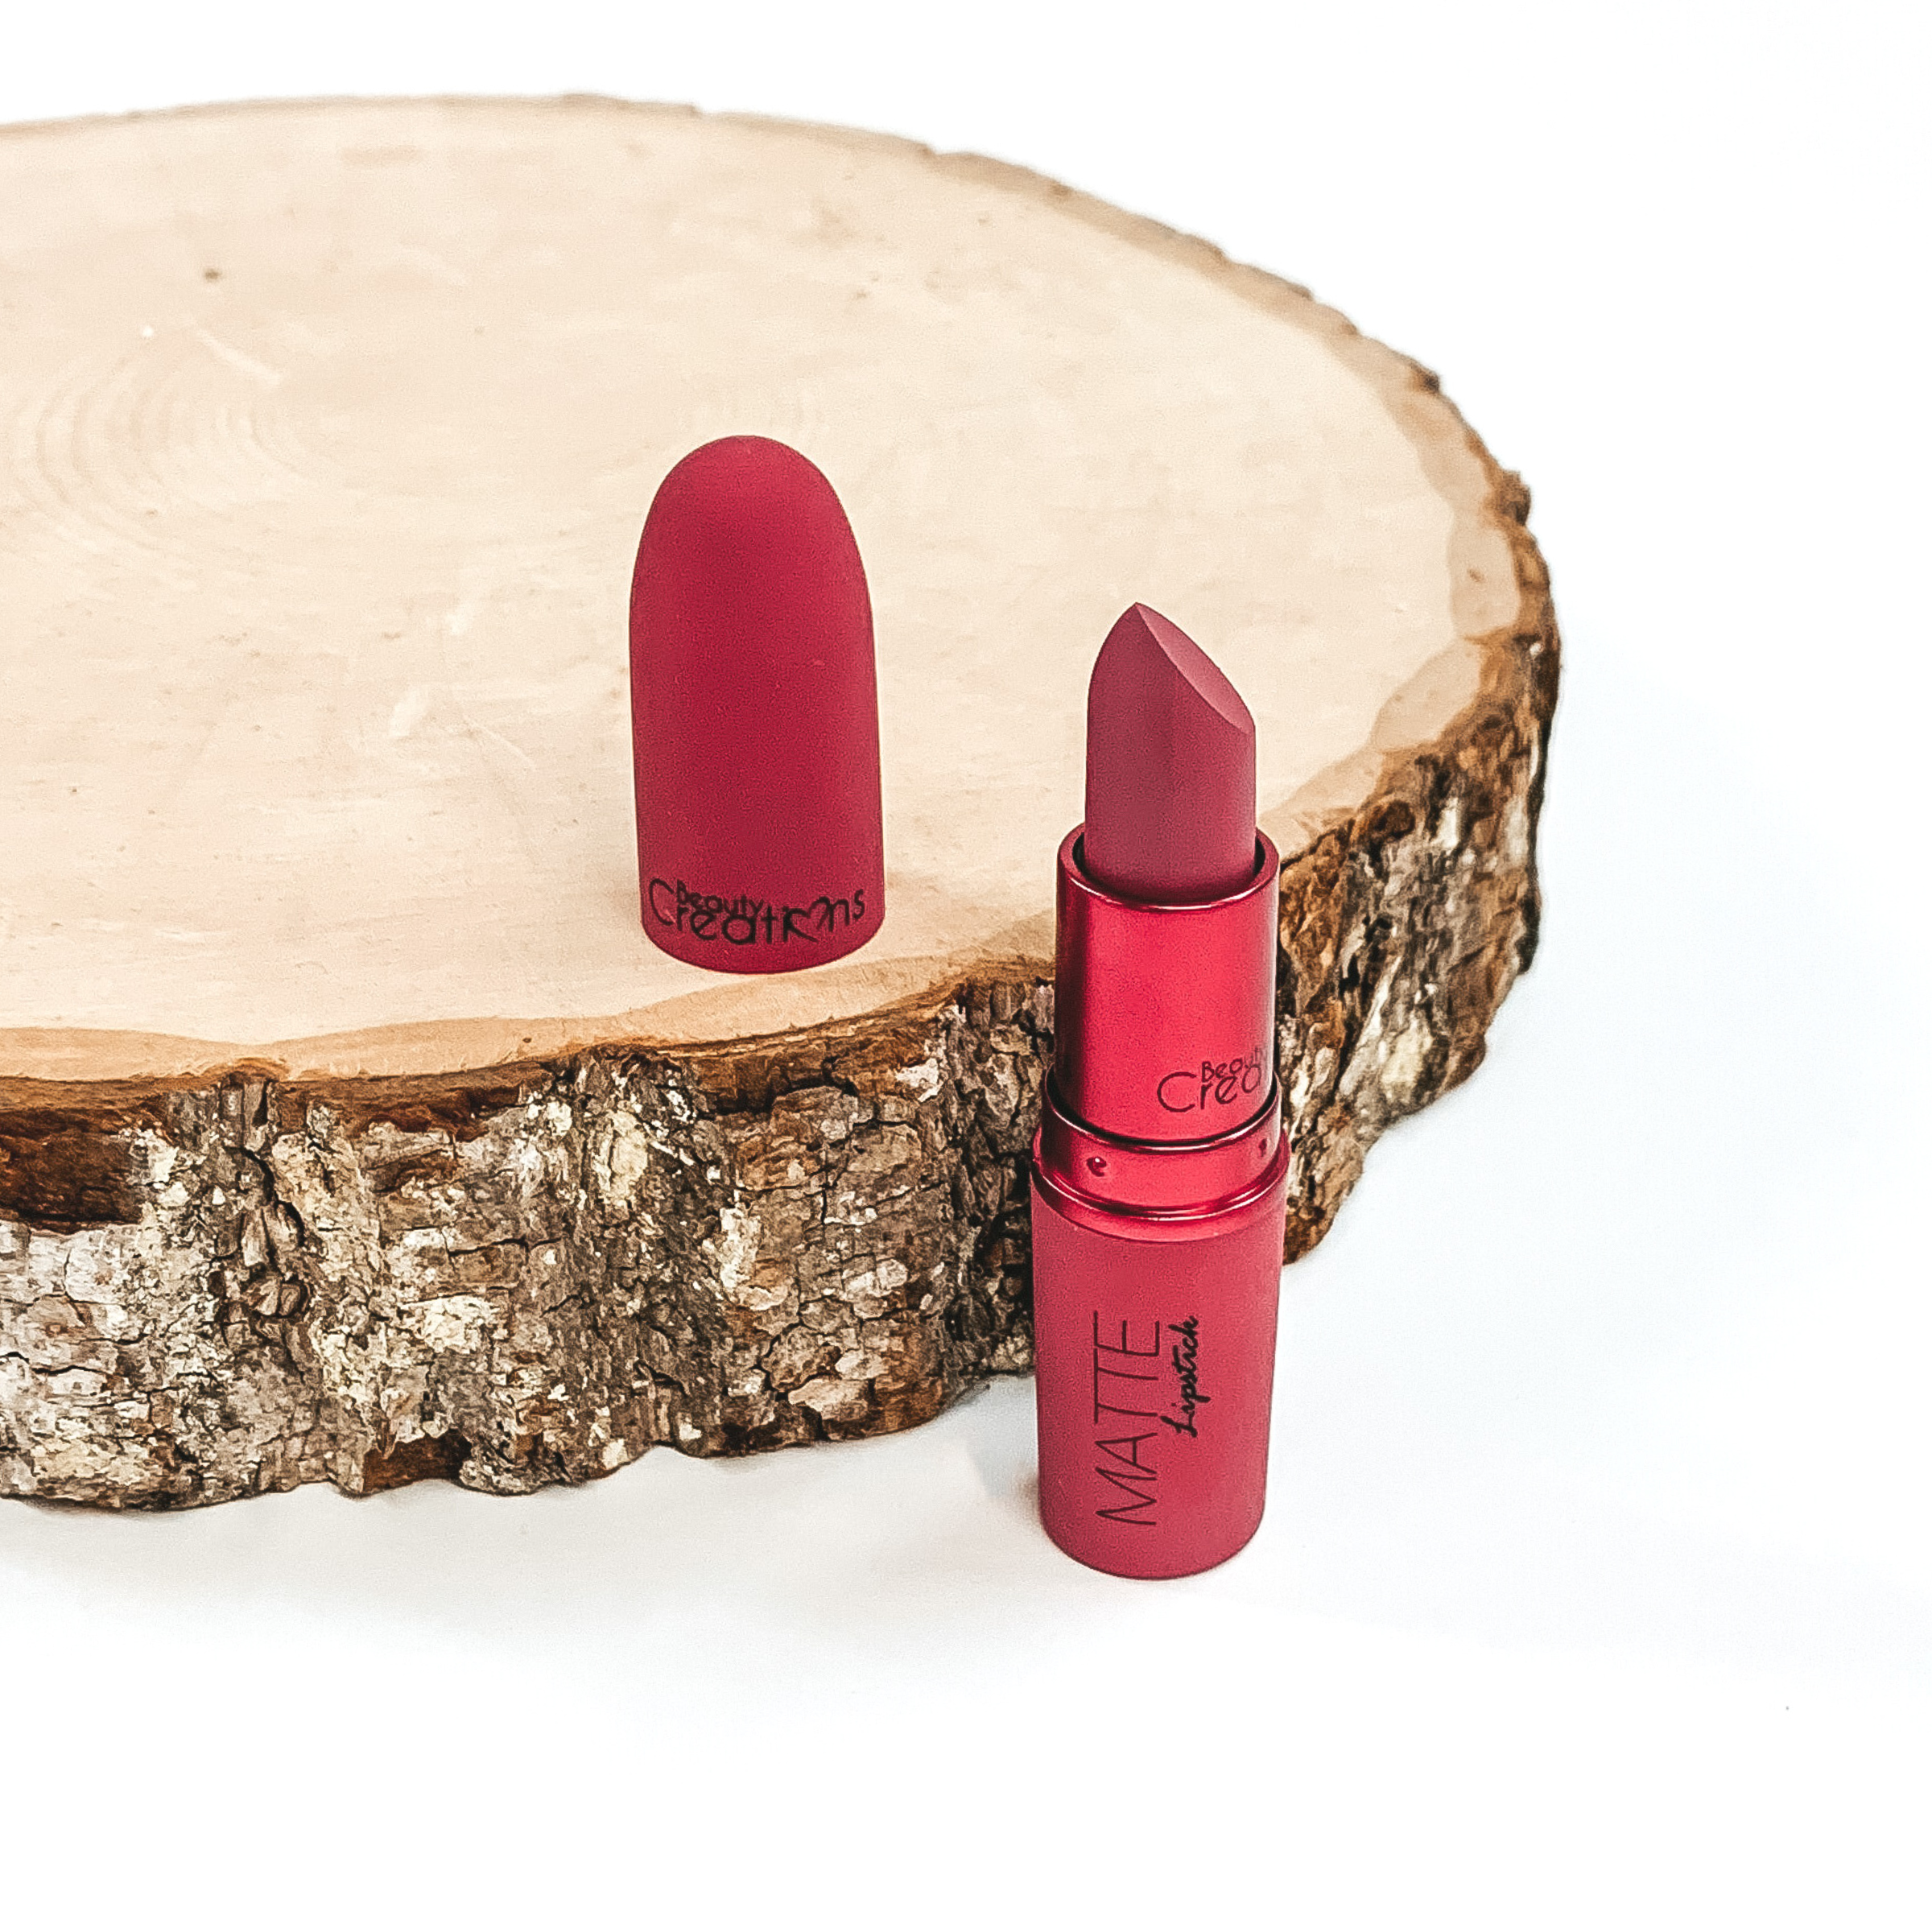 Shade bite me lipstick that is opened and twisted up. The tube is standing on a white background and next to it is some wood that the lid from the lipstick is placed on.